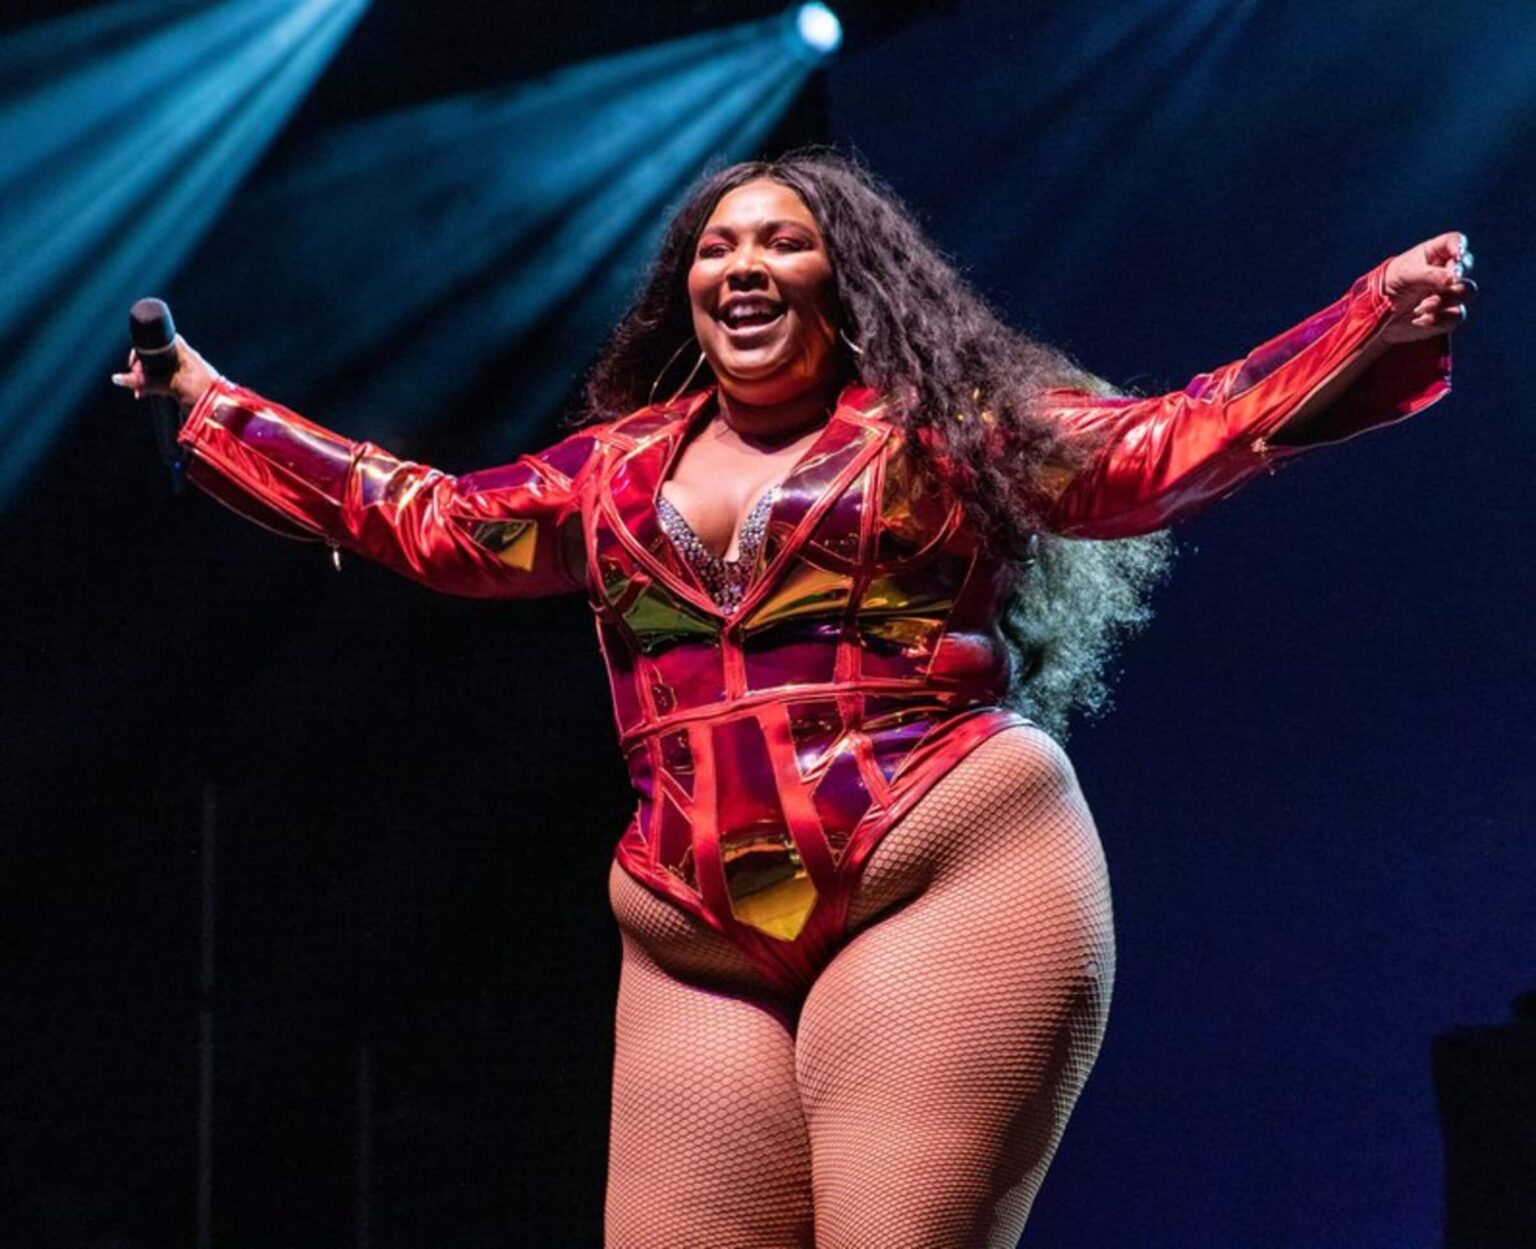 There’s nothing better than listening to one of the greatest hit makers of our time: Lizzo. Listen to these feel good songs.